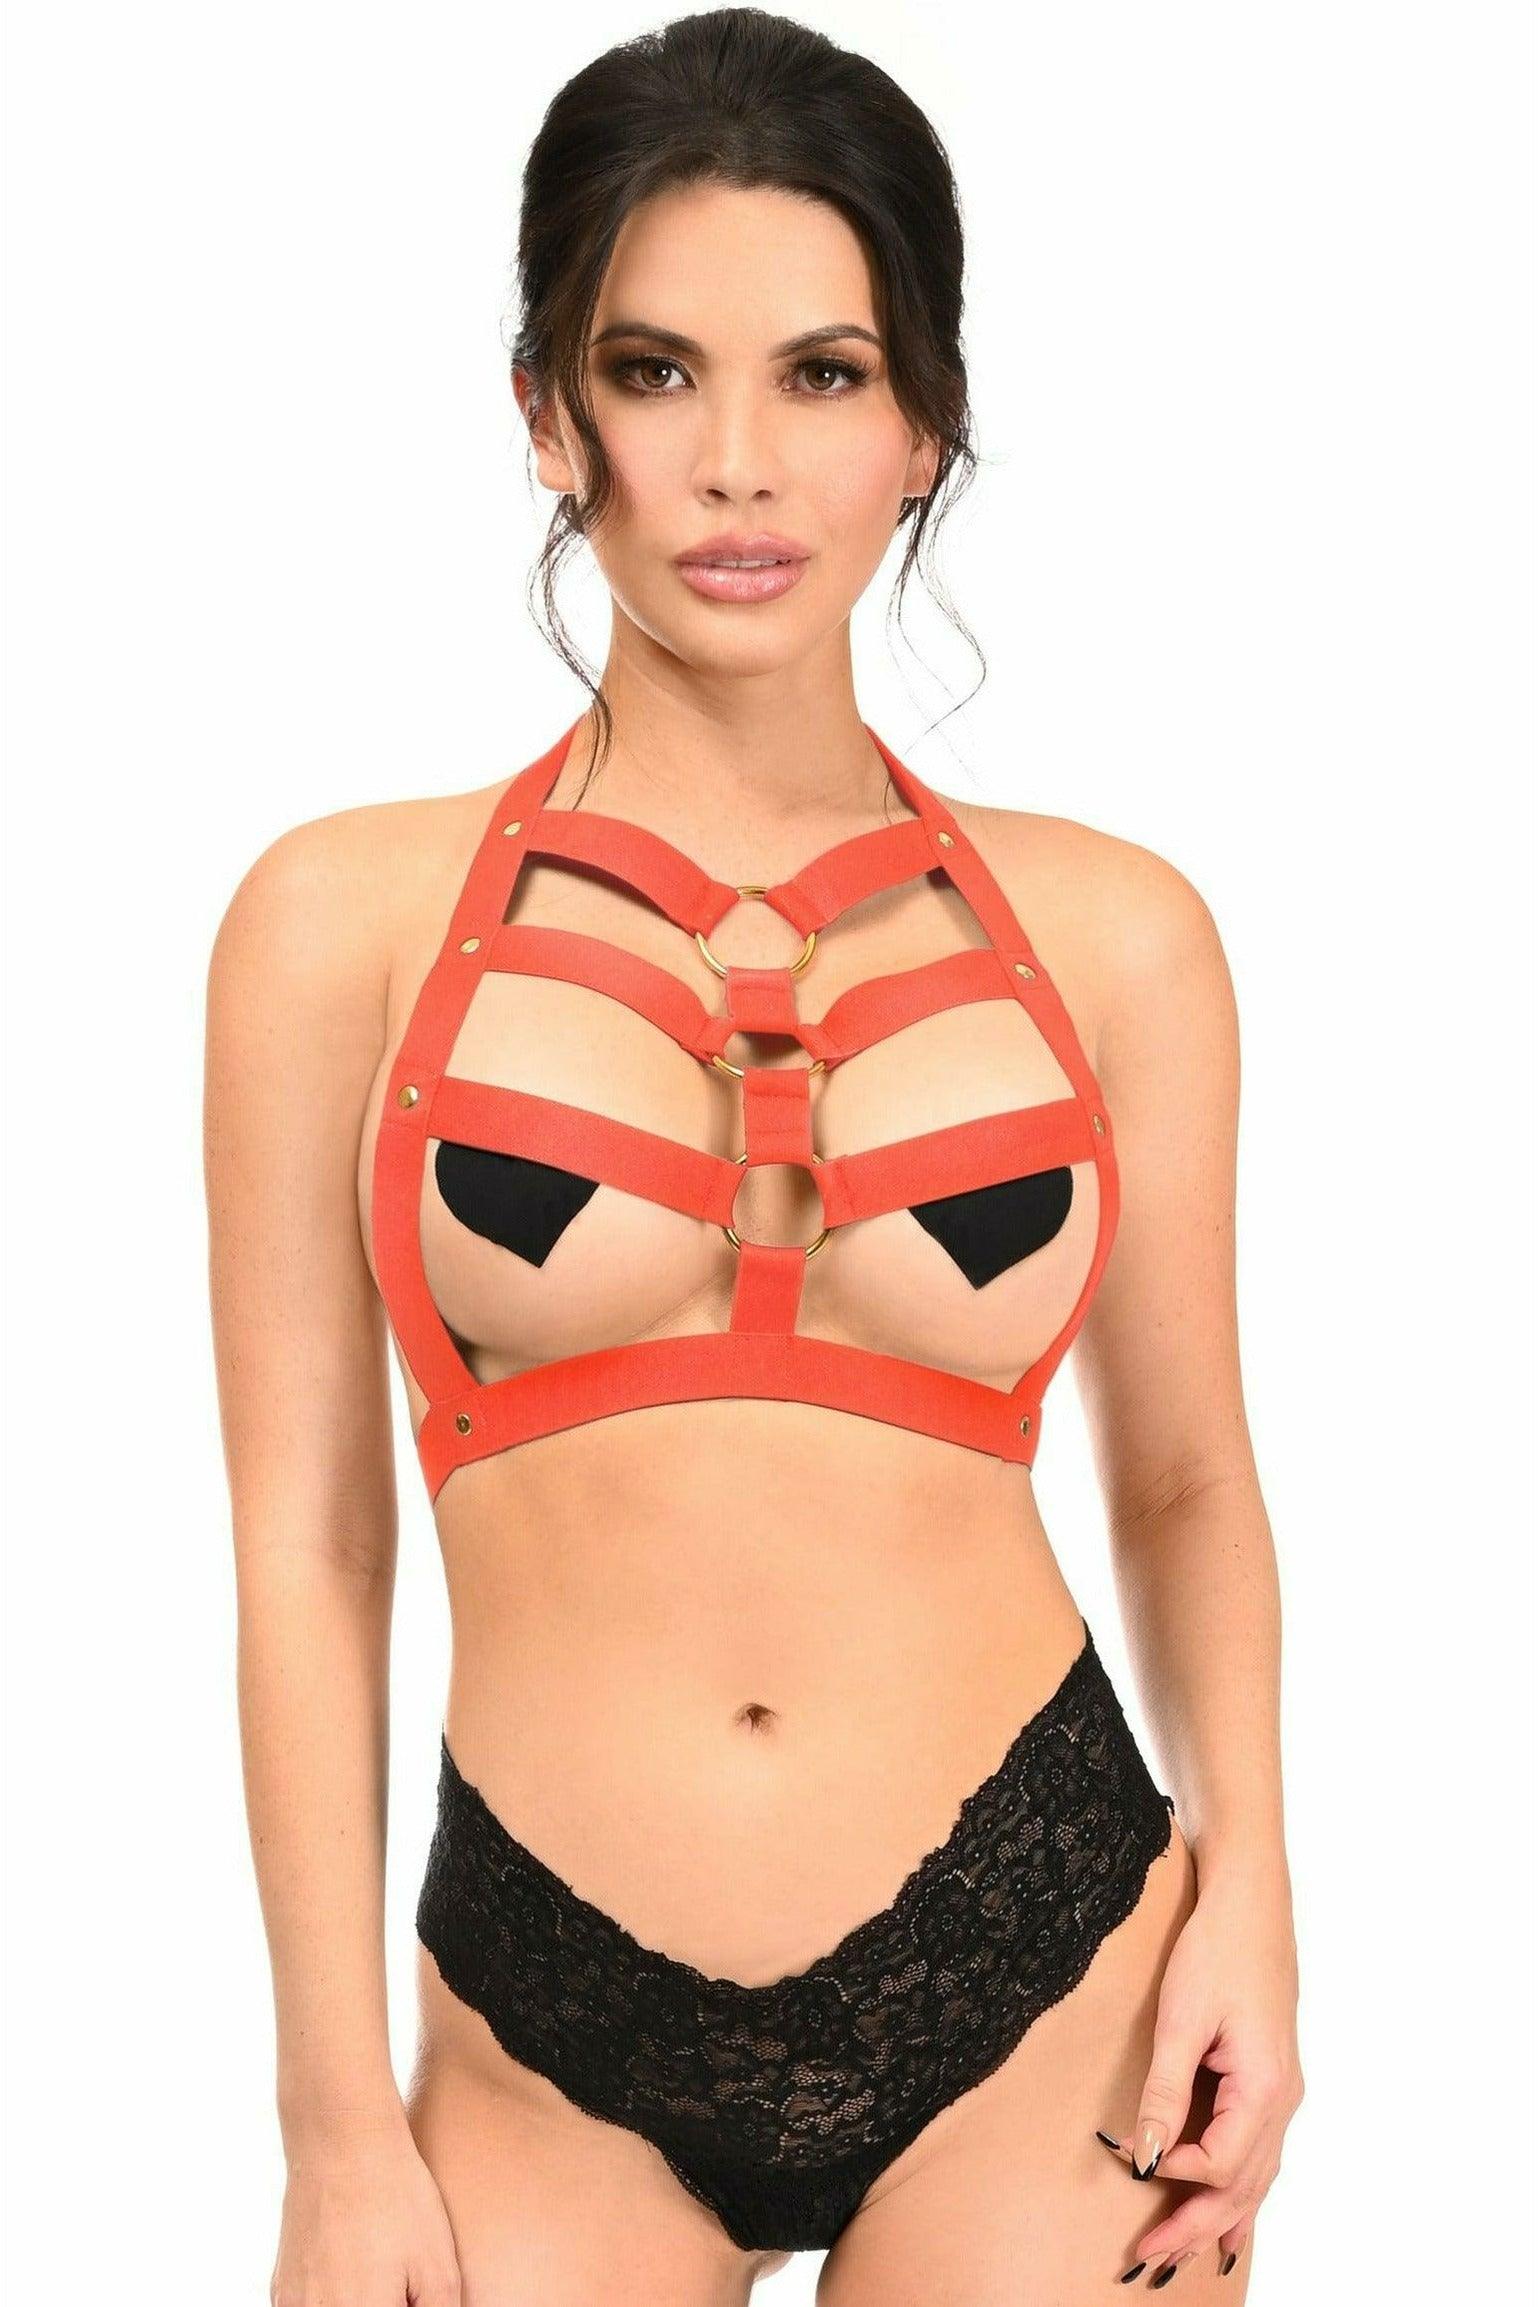 Red Stretchy Body Harness w/Gold Hardware - Flyclothing LLC